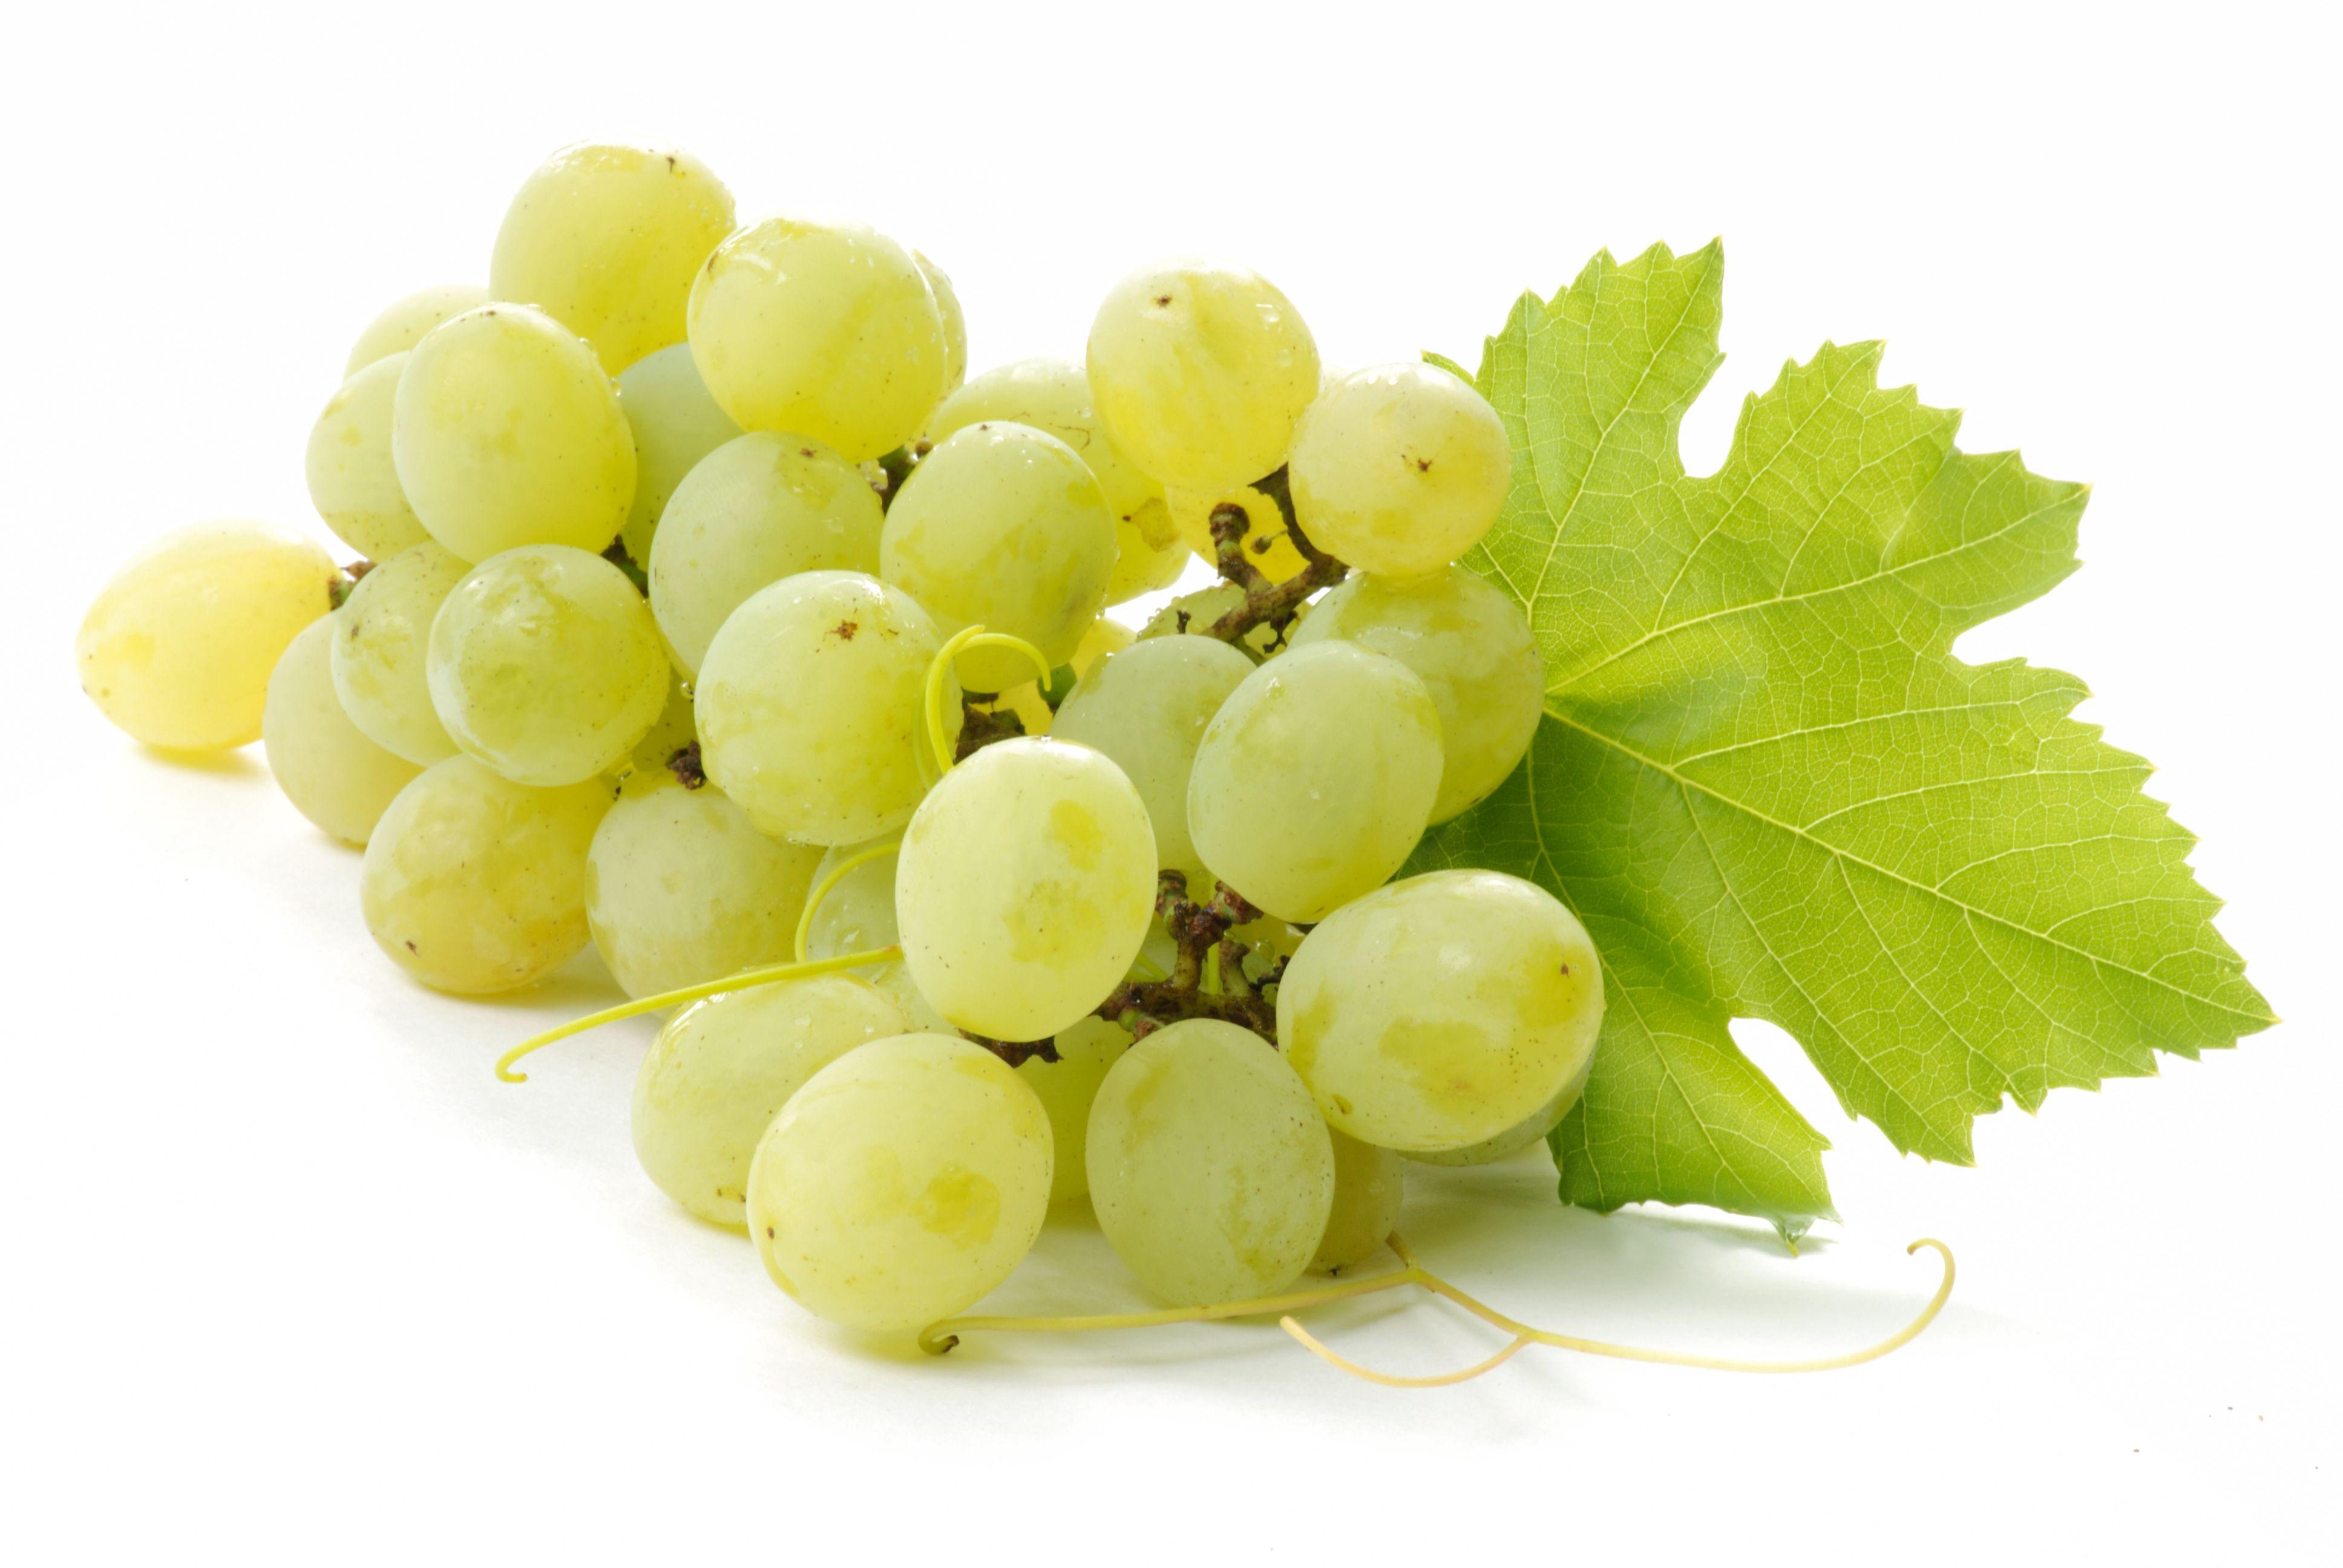 Grapes Image, Grapes Image Galleries,. Ie Wallpaper Graphics